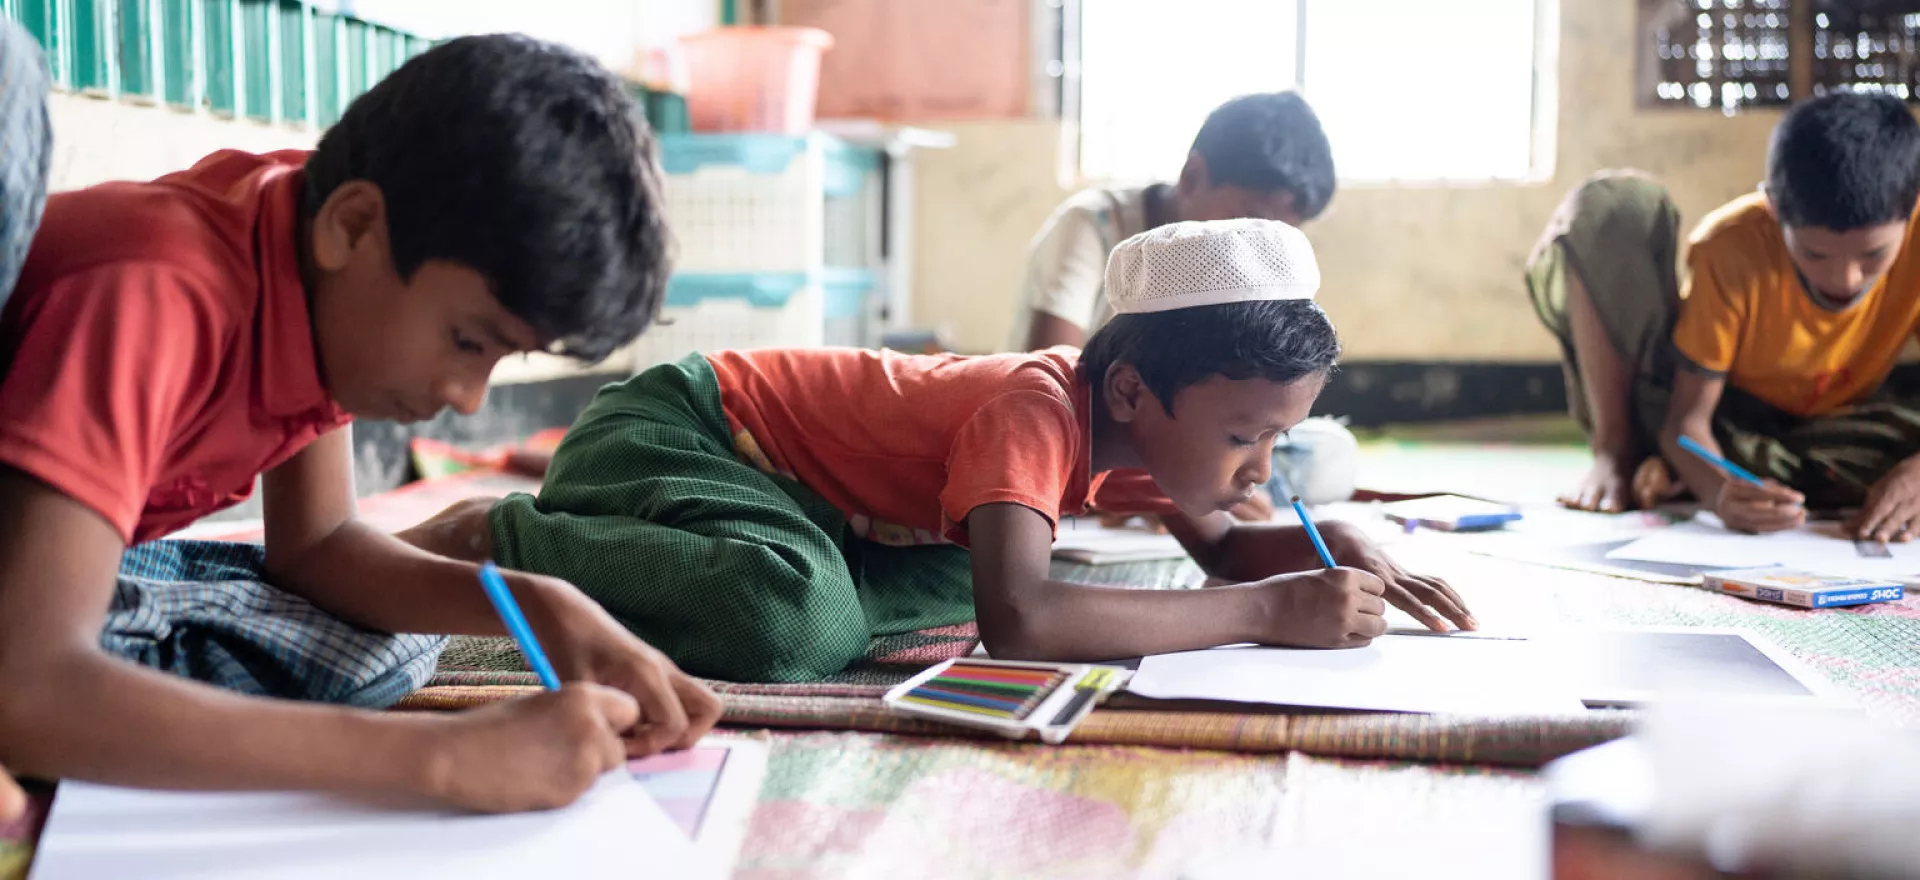 Bangladesh. A group of children draw pictures with colouring pencils during a group activity session at a Multi-Purpose Centre in a Rohingya refugee camp in Cox’s Bazar